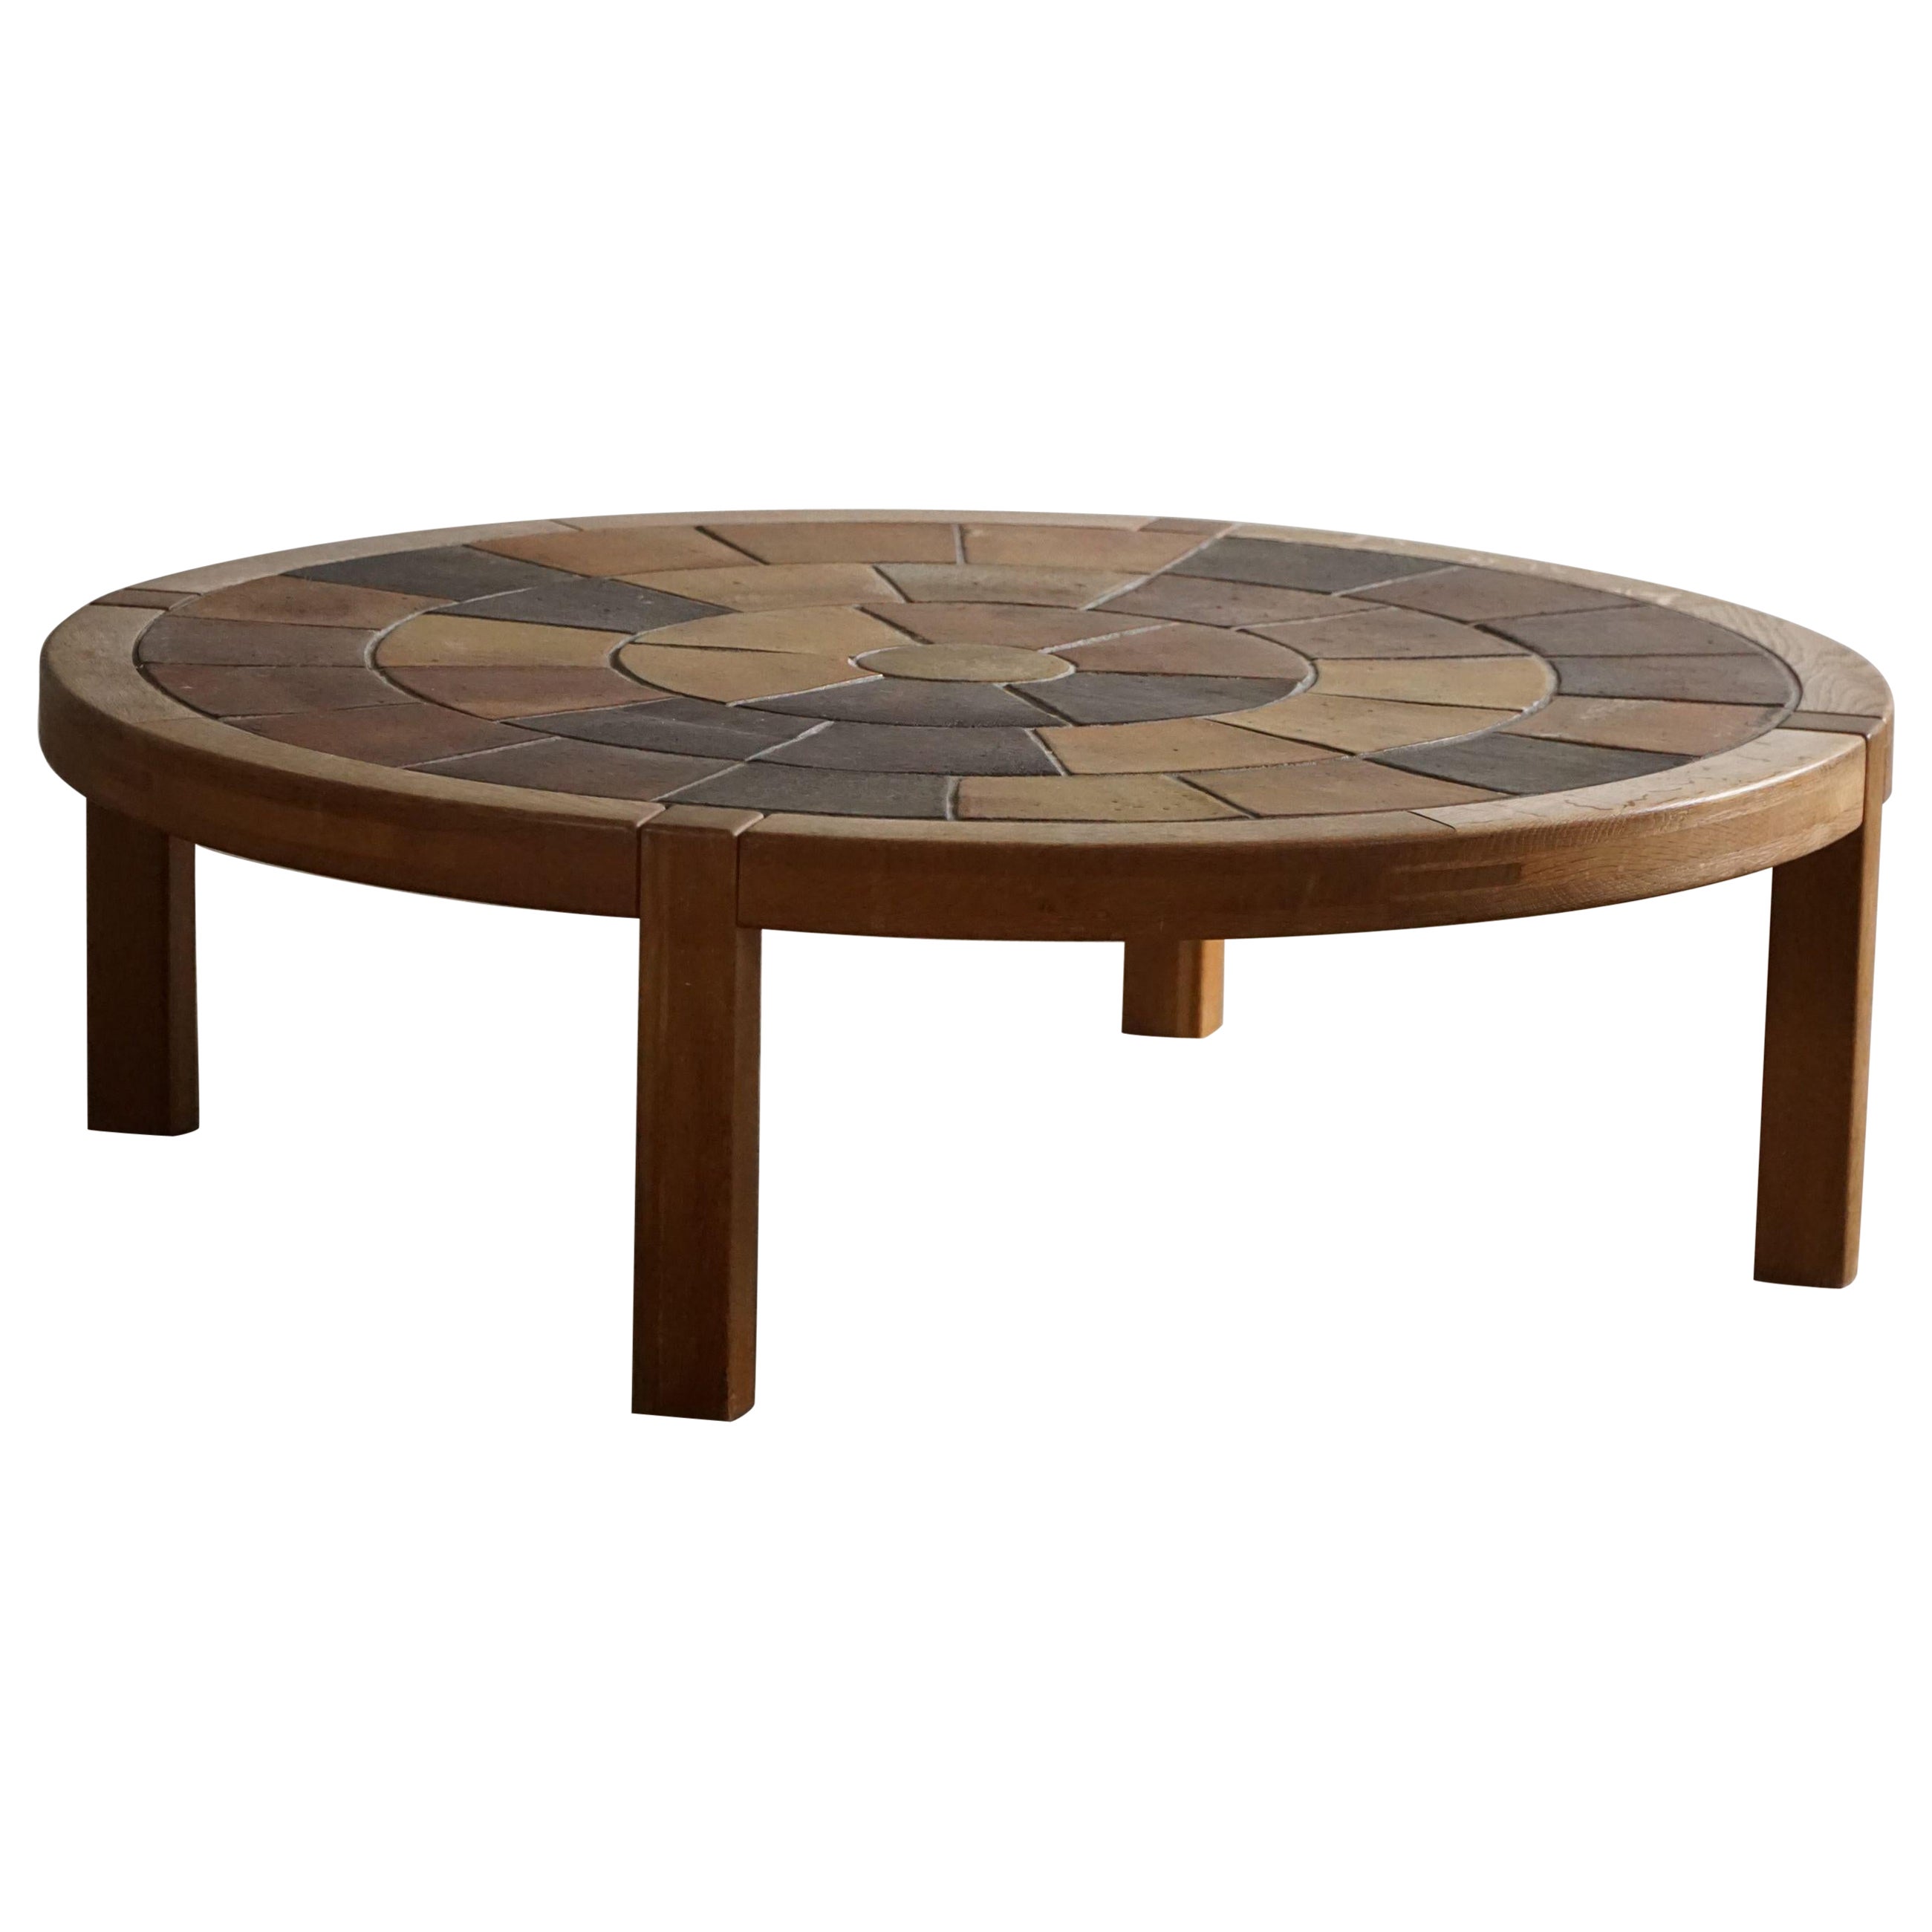 Danish Modern, Round Coffee Table with Ceramic Tiles by Sallingeboe, 1981